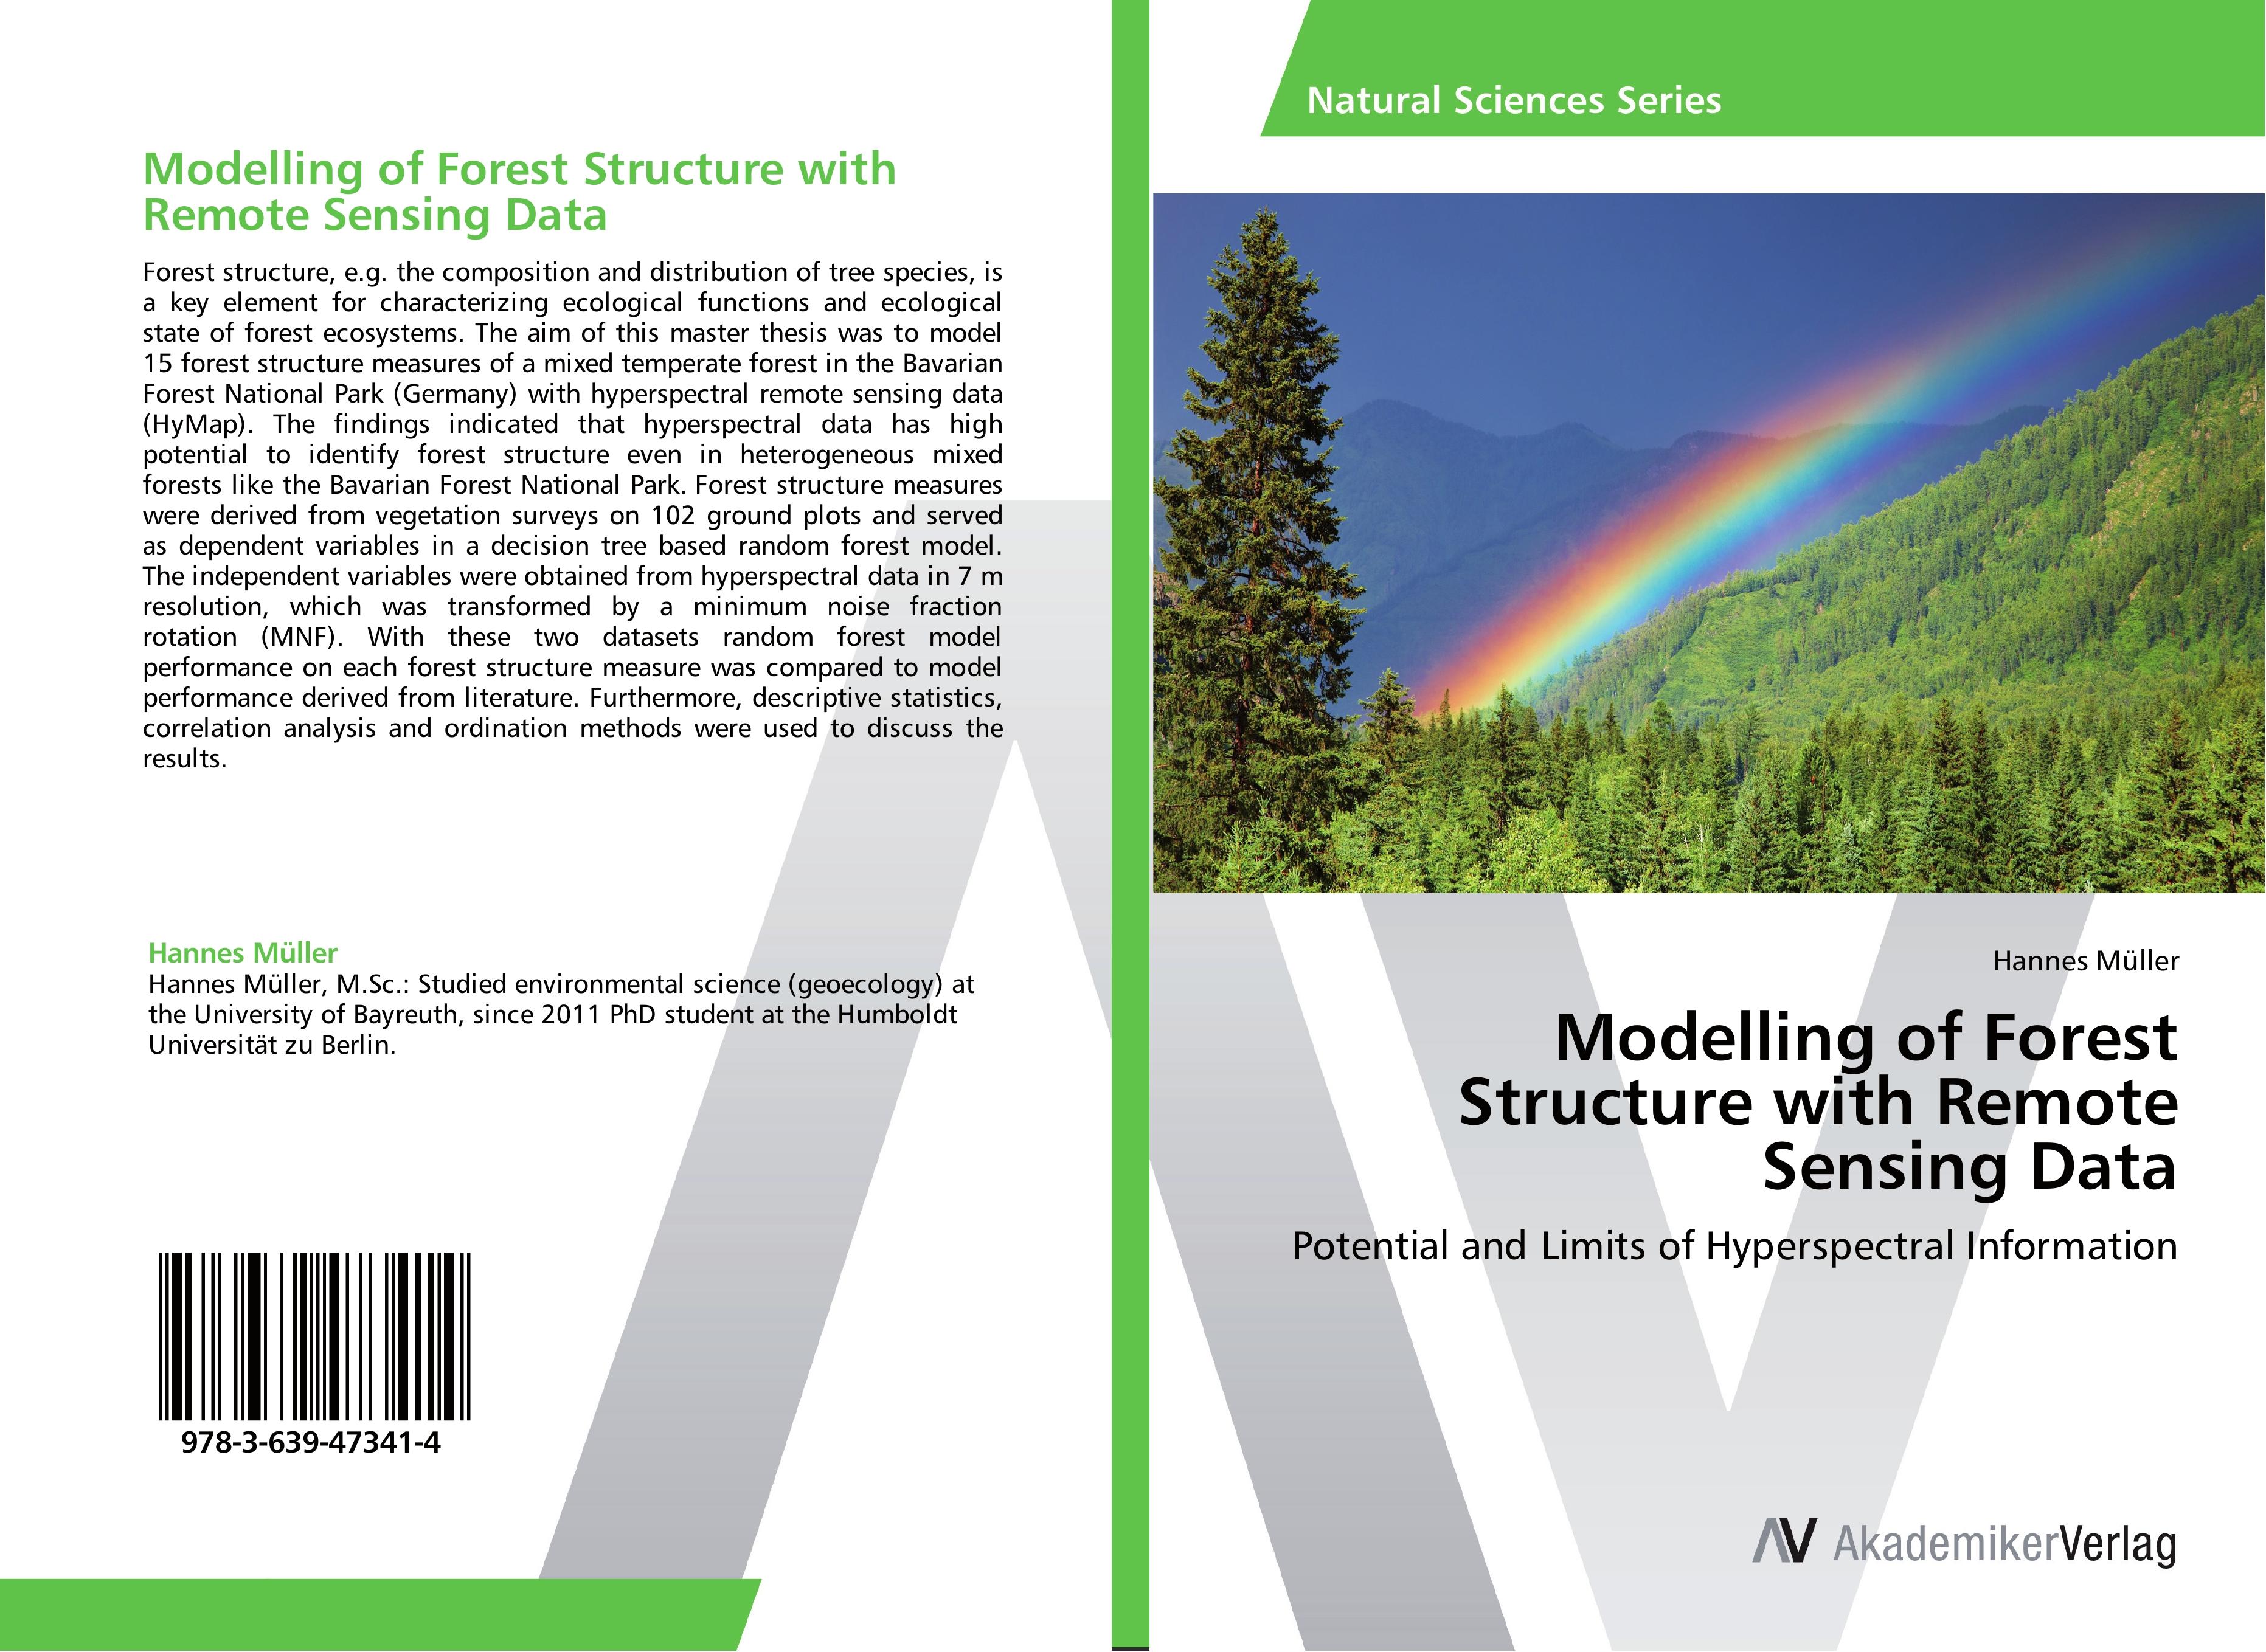 Modelling of Forest Structure with Remote Sensing Data - Hannes Mueller